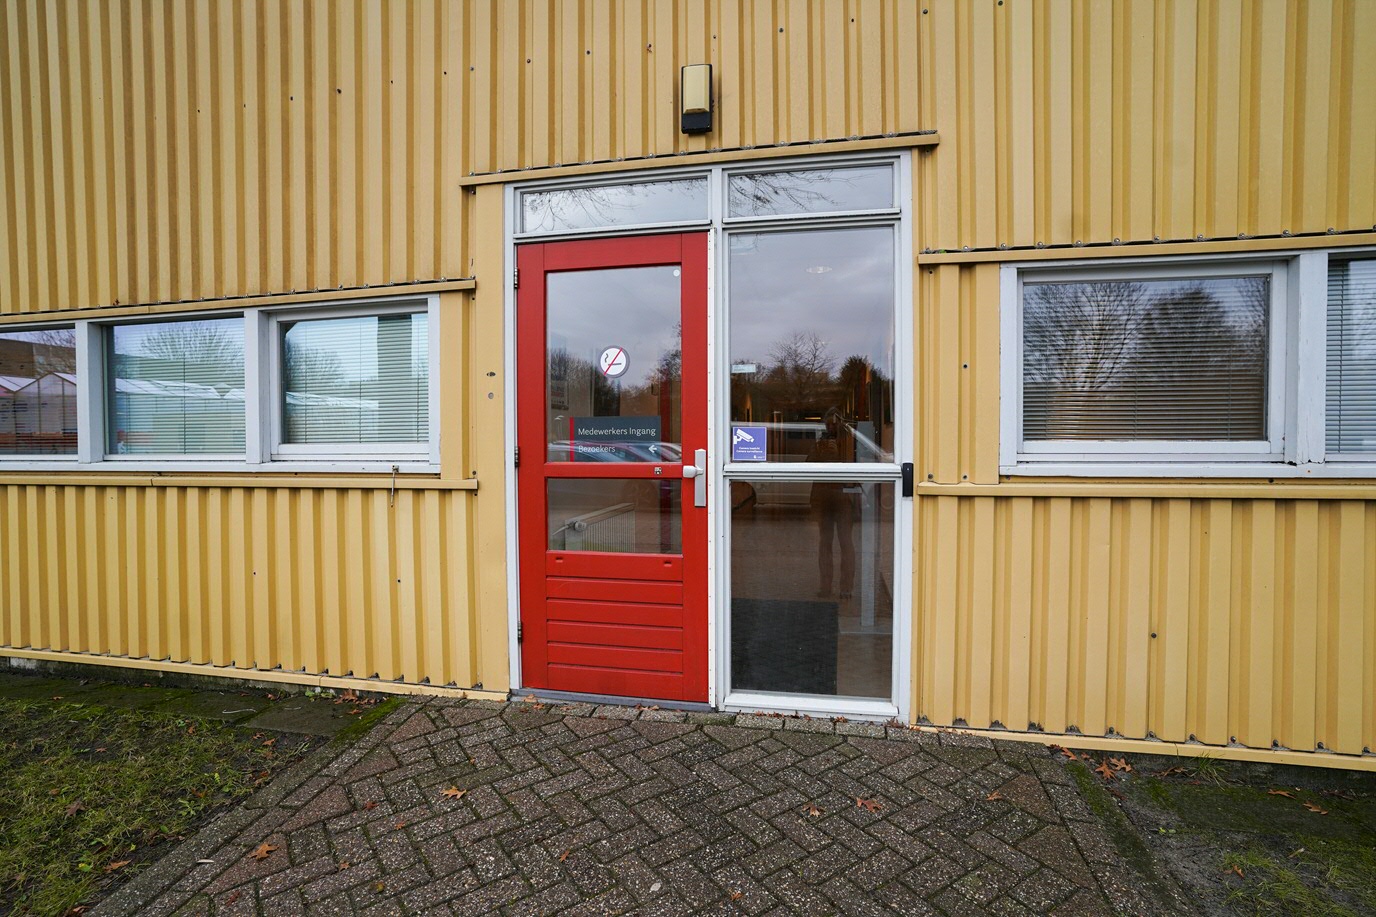 Back entrance blauwborgje 8, access with pass